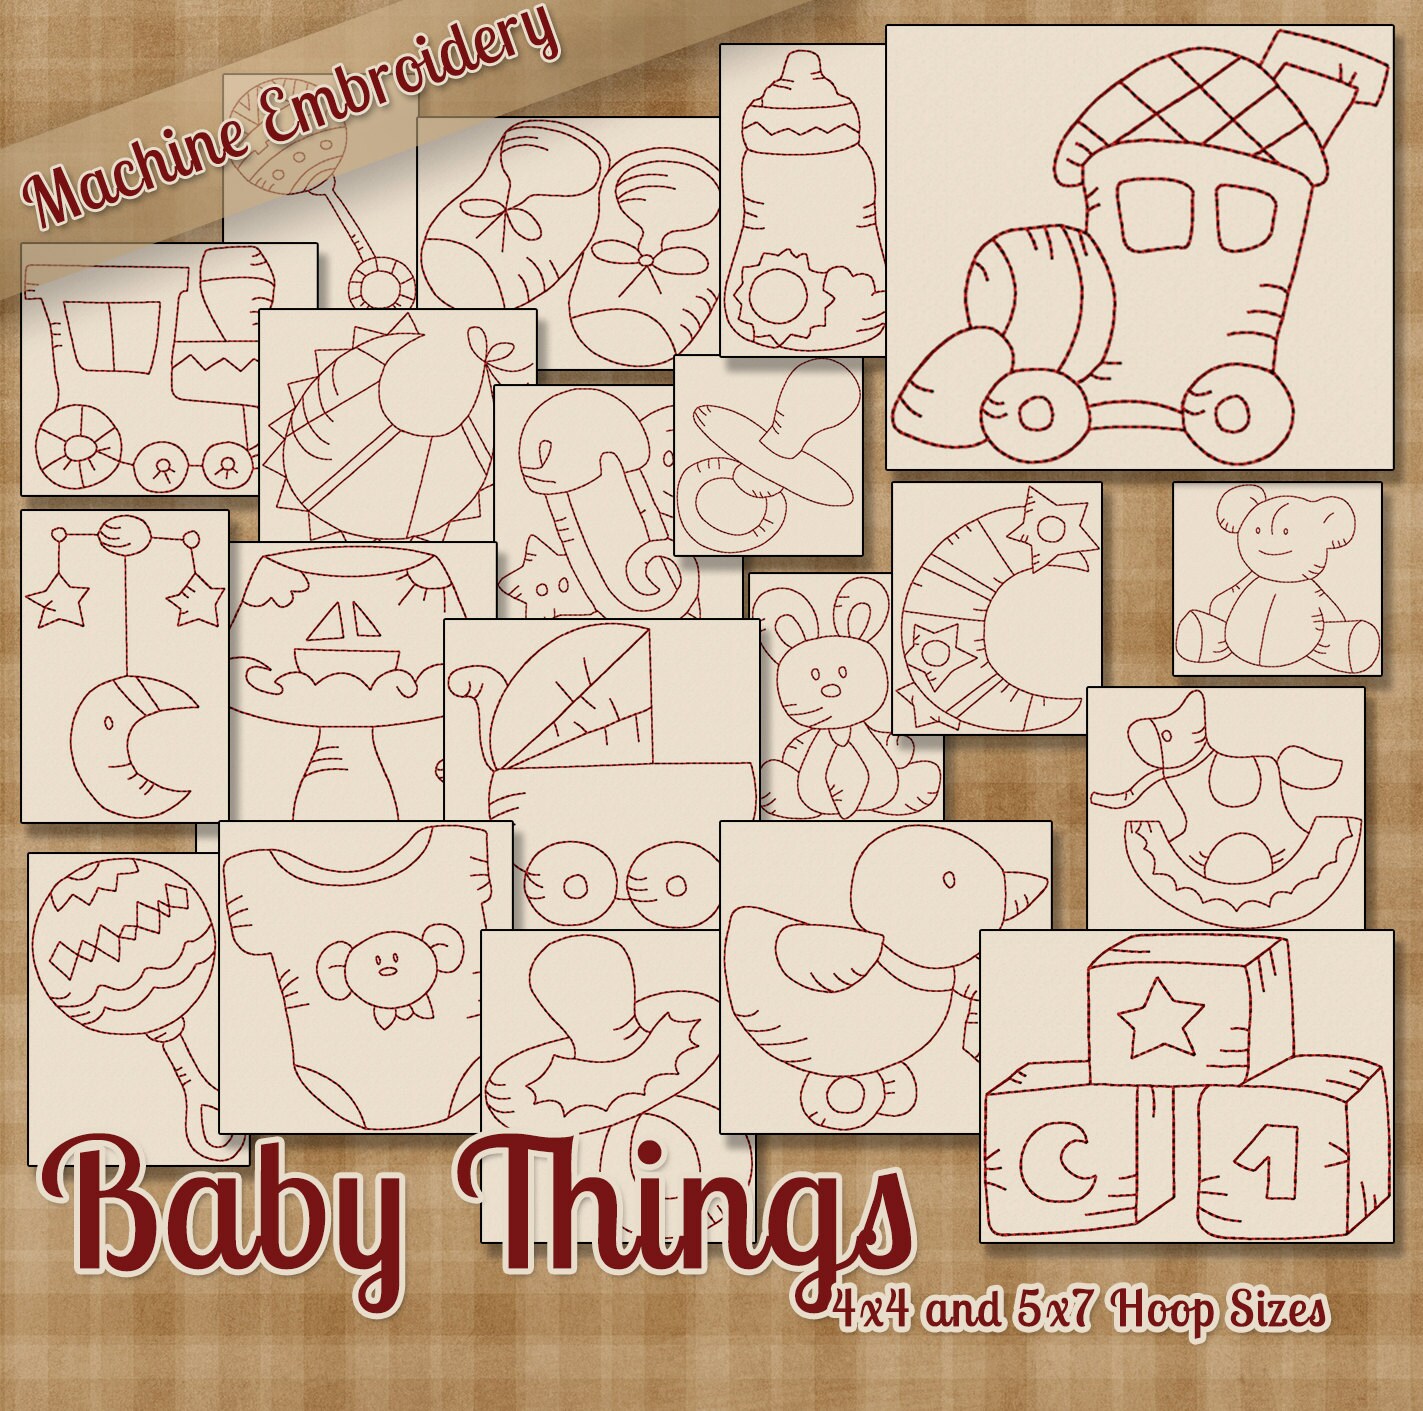 Baby Things Machine Embroidery Patterns / Redwork Designs 20 - Etsy